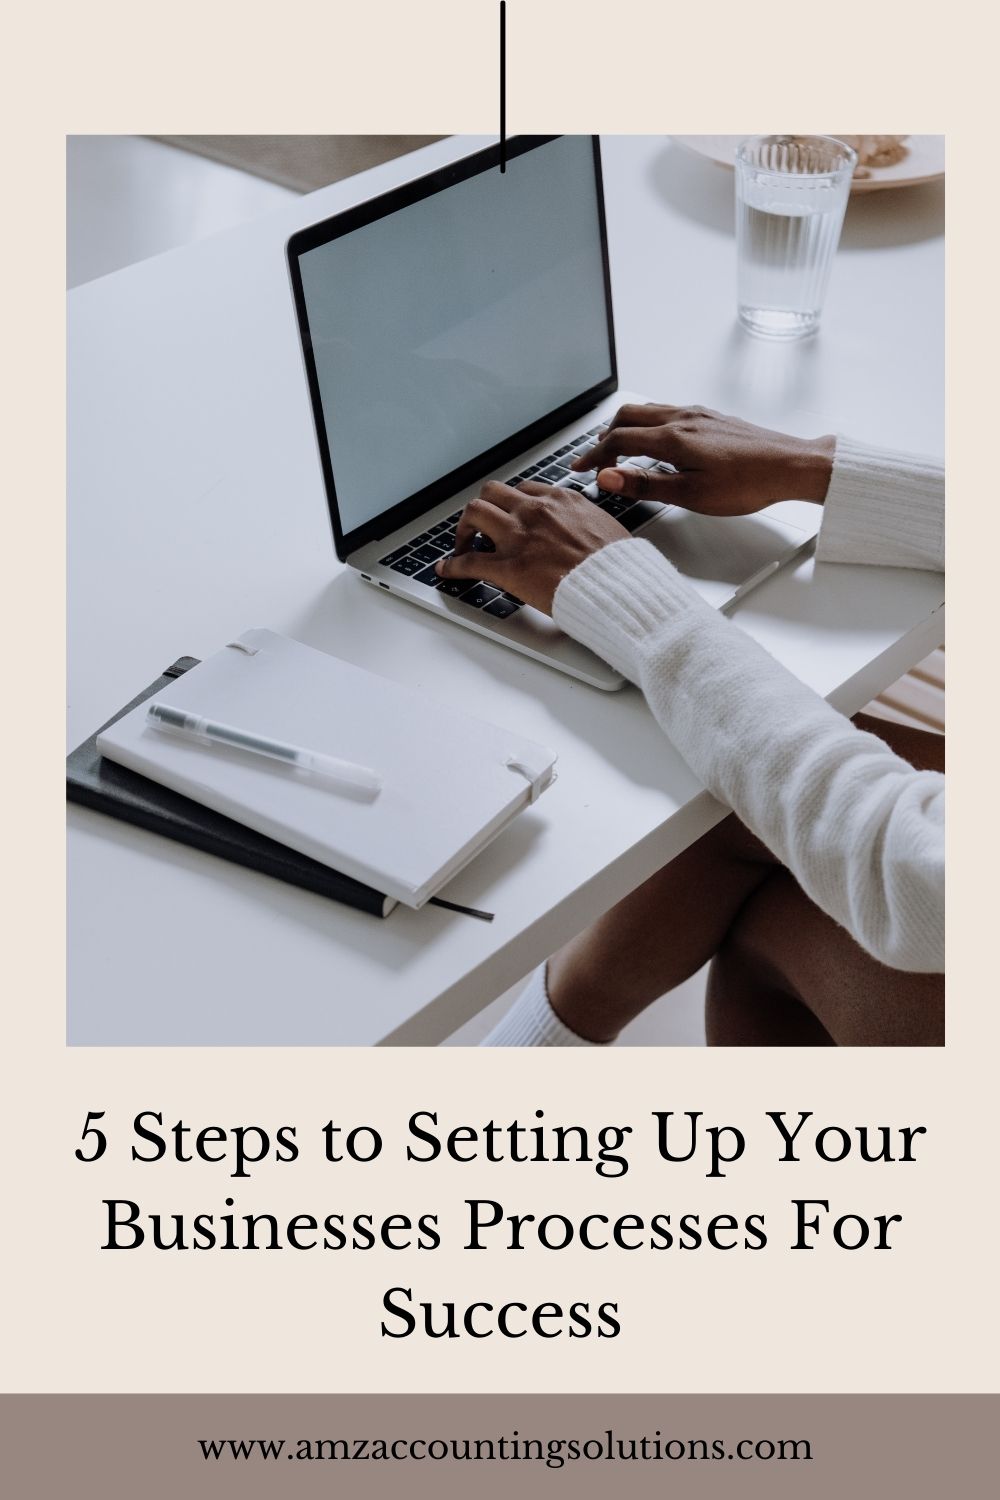 5 Steps to Setting Up Your Businesses Processes For Success